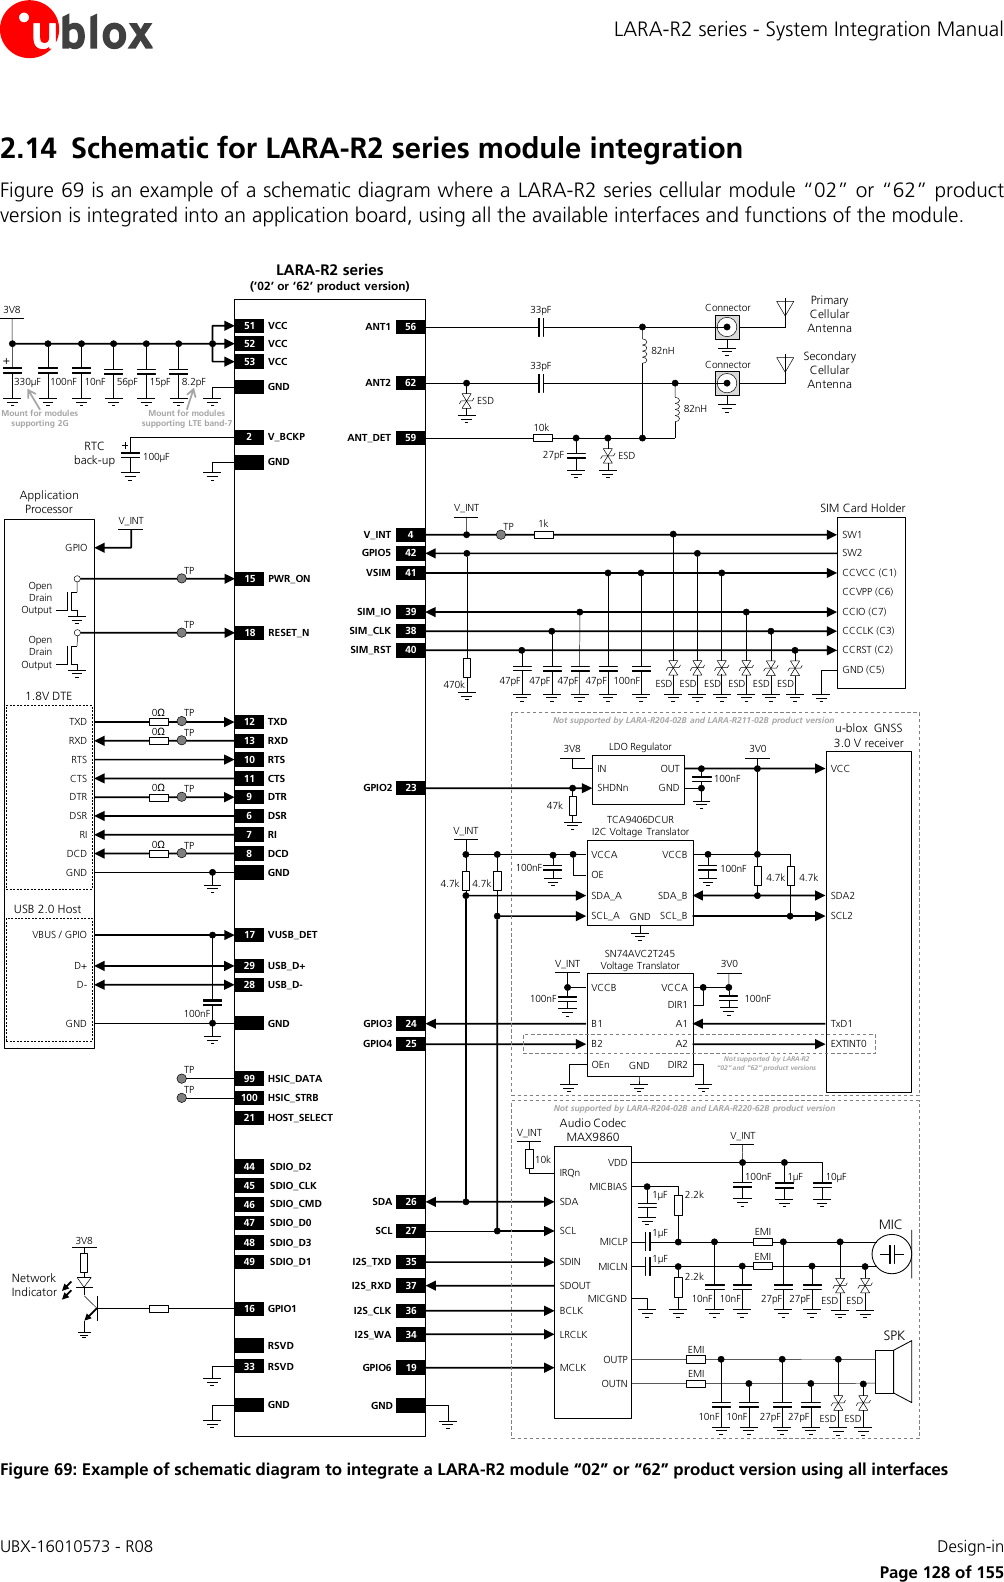 LARA-R2 series - System Integration Manual UBX-16010573 - R08    Design-in     Page 128 of 155 2.14 Schematic for LARA-R2 series module integration Figure 69 is an example of a schematic diagram where a LARA-R2 series cellular module “02” or “62” product version is integrated into an application board, using all the available interfaces and functions of the module.  TXDRXDRTSCTSDTRDSRRIDCDGND12 TXD9DTR13 RXD10 RTS11 CTS6DSR7RI8DCDGND3V8GND330µF 10nF100nF 56pFLARA-R2 series(‘02’ or ‘62’ product version)52 VCC53 VCC51 VCC+100µF2V_BCKPGND GNDGNDRTC back-up1.8V DTEUSB 2.0 Host18 RESET_NApplication ProcessorOpen Drain Output15 PWR_ONOpen Drain OutputD+D-29 USB_D+28 USB_D-15pFTPTP0Ω0ΩTPTP0Ω0ΩTPTP47pFSIM Card HolderCCVCC (C1)CCVPP (C6)CCIO (C7)CCCLK (C3)CCRST (C2)GND (C5)47pF 47pF 100nF41VSIM39SIM_IO38SIM_CLK40SIM_RST47pFSW1 SW24V_INT42GPIO5470k ESD ESD ESD ESD ESD ESD1kTPV_INTSDIO_CMDSDIO_D0SDIO_D3SDIO_D146474849SDIO_D2SDIO_CLK4445VBUS / GPIO 17 VUSB_DET100nF62ANT259ANT_DET10kConnector27pF ESDSecondary Cellular  Antenna33pF82nH82nH56Connector Primary Cellular Antenna33pFANT1GND16 GPIO13V8Network IndicatorRSVD33 RSVD99 HSIC_DATA100 HSIC_STRB21 HOST_SELECTTPTP8.2pFMount for modules supporting 2GMount for modules supporting LTE band-7ESDV_INTBCLKLRCLKAudio Codec MAX9860SDINSDOUTSDASCL36I2S_CLK34I2S_WA35I2S_TXD37I2S_RXD19GPIO6 MCLKIRQn10k10µF1µF100nFVDDSPKOUTPOUTNMICMICBIAS 1µF 2.2k1µF1µFMICLNMICLPMICGND2.2kESD ESDV_INT10nF10nFEMIEMI27pF27pF10nFEMIEMIESD ESD27pF27pF10nF24GPIO3V_INTB1  A1GNDB2 A2VCCB VCCASN74AVC2T245 Voltage Translator100nF100nF3V0TxD14.7kIN OUTLDO RegulatorSHDNn4.7k3V8 3V023GPIO2V_INTSDA_A  SDA_BGNDSCL_A SCL_BVCCA VCCBTCA9406DCURI2C Voltage Translator100nF100nF100nF47kSDA2SCL2VCCDIR1DIR2OEnOEGNDEXTINT0GPIO4 254.7k4.7ku-blox  GNSS3.0 V receiver26SDA27SCLGNDNot supported by LARA-R204-02B and LARA-R211-02B product versionNot supported by LARA-R204-02B and LARA-R220-62B  product versionNot supported  by LARA-R2 “02” and “62” product versionsGPIOV_INT Figure 69: Example of schematic diagram to integrate a LARA-R2 module “02” or “62” product version using all interfaces 